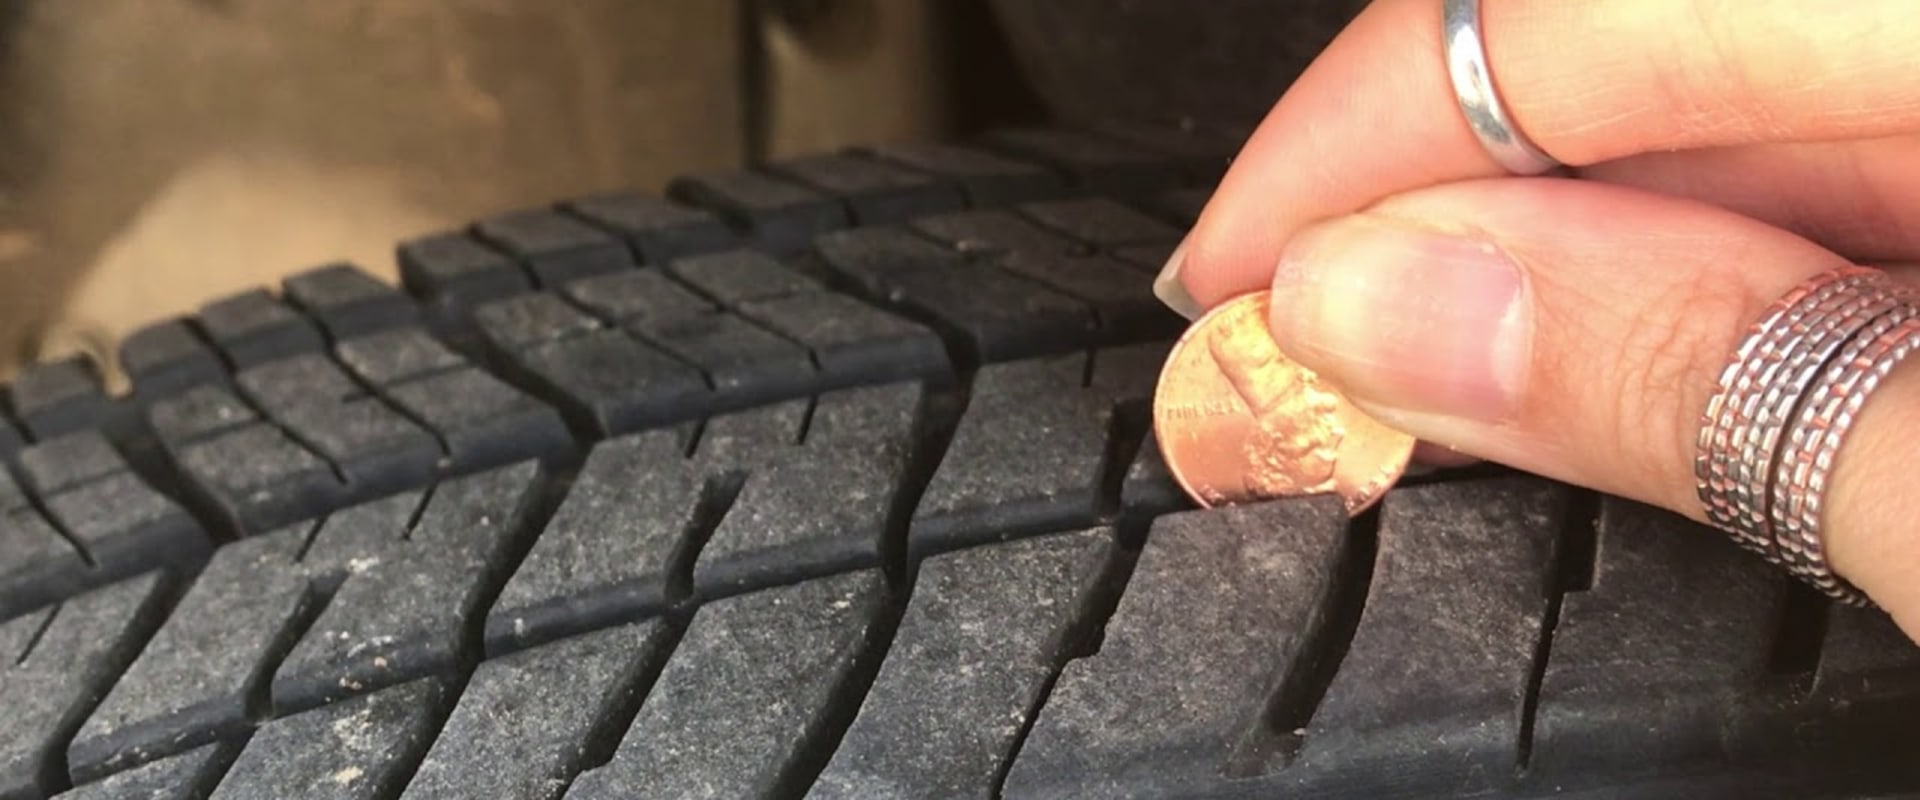 How to Check for Worn Tires During Automotive Maintenance and Repair